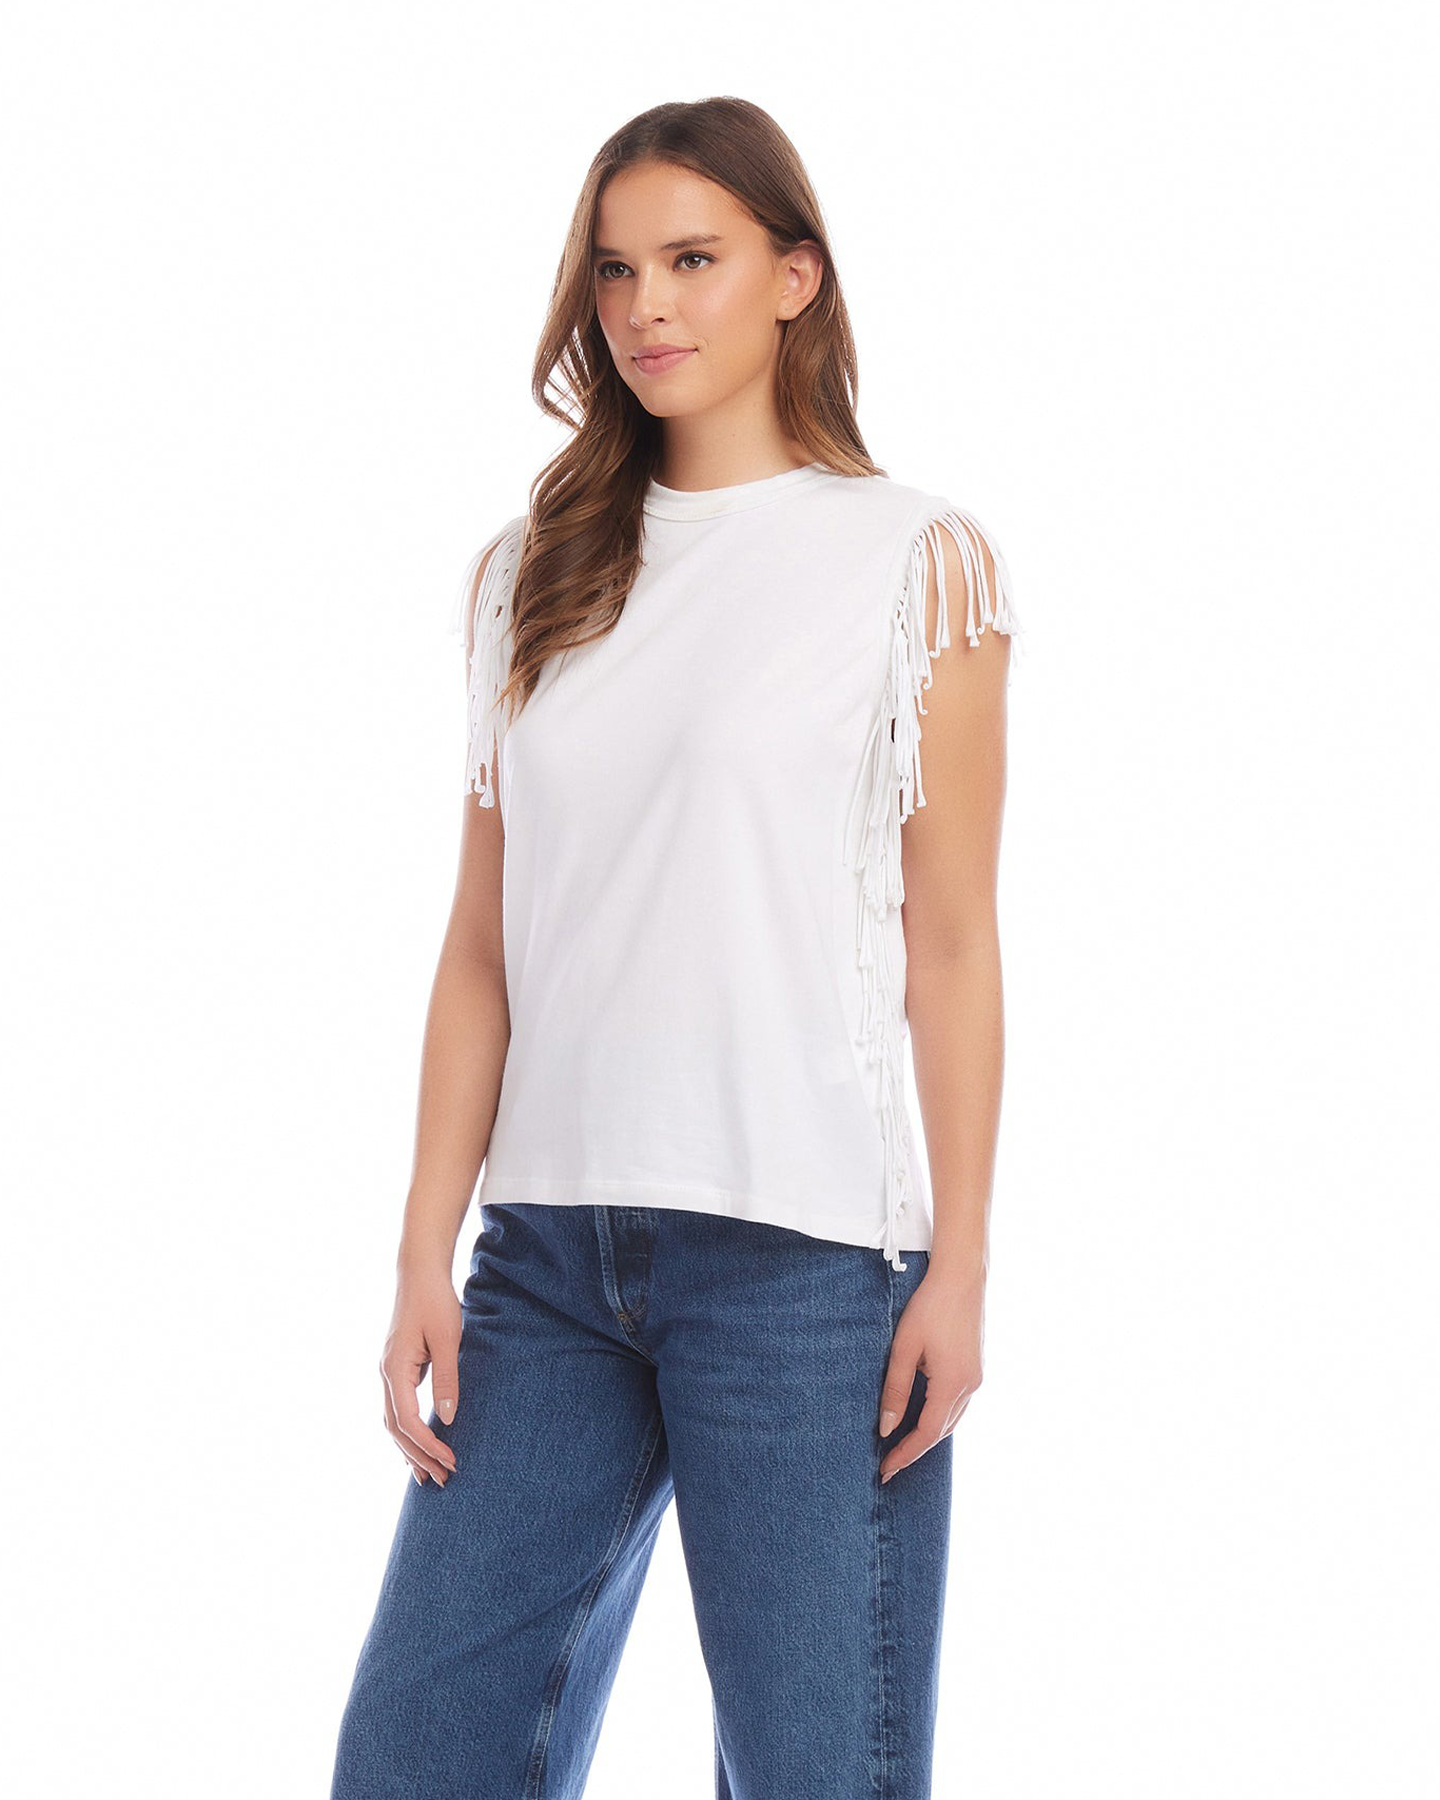 COTTON BLEND JERSEY OFF WHITE FRINGE TEE